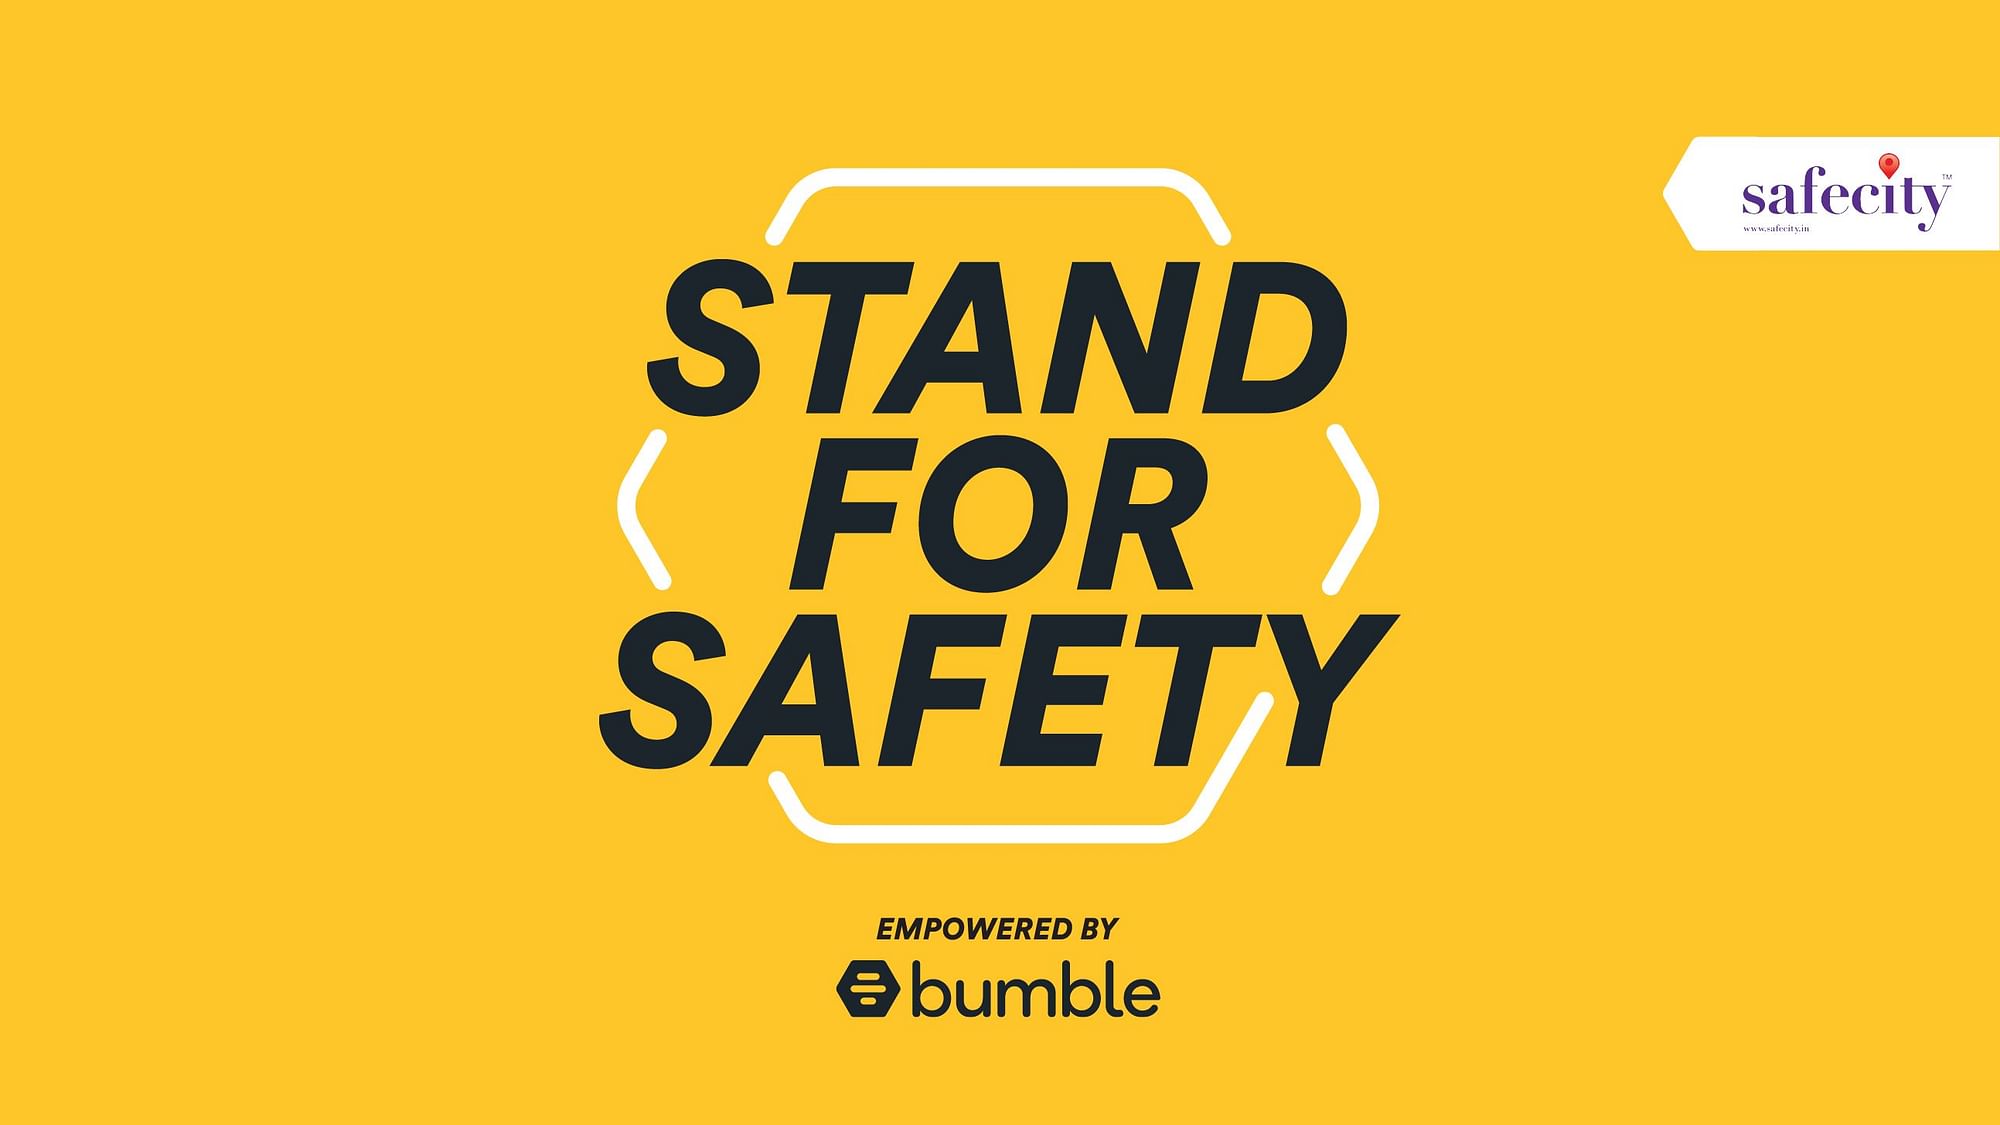 As part of its mission to create a safer, kinder and more respectful internet, Bumble has launched a new initiative called ‘Stand For Safety'